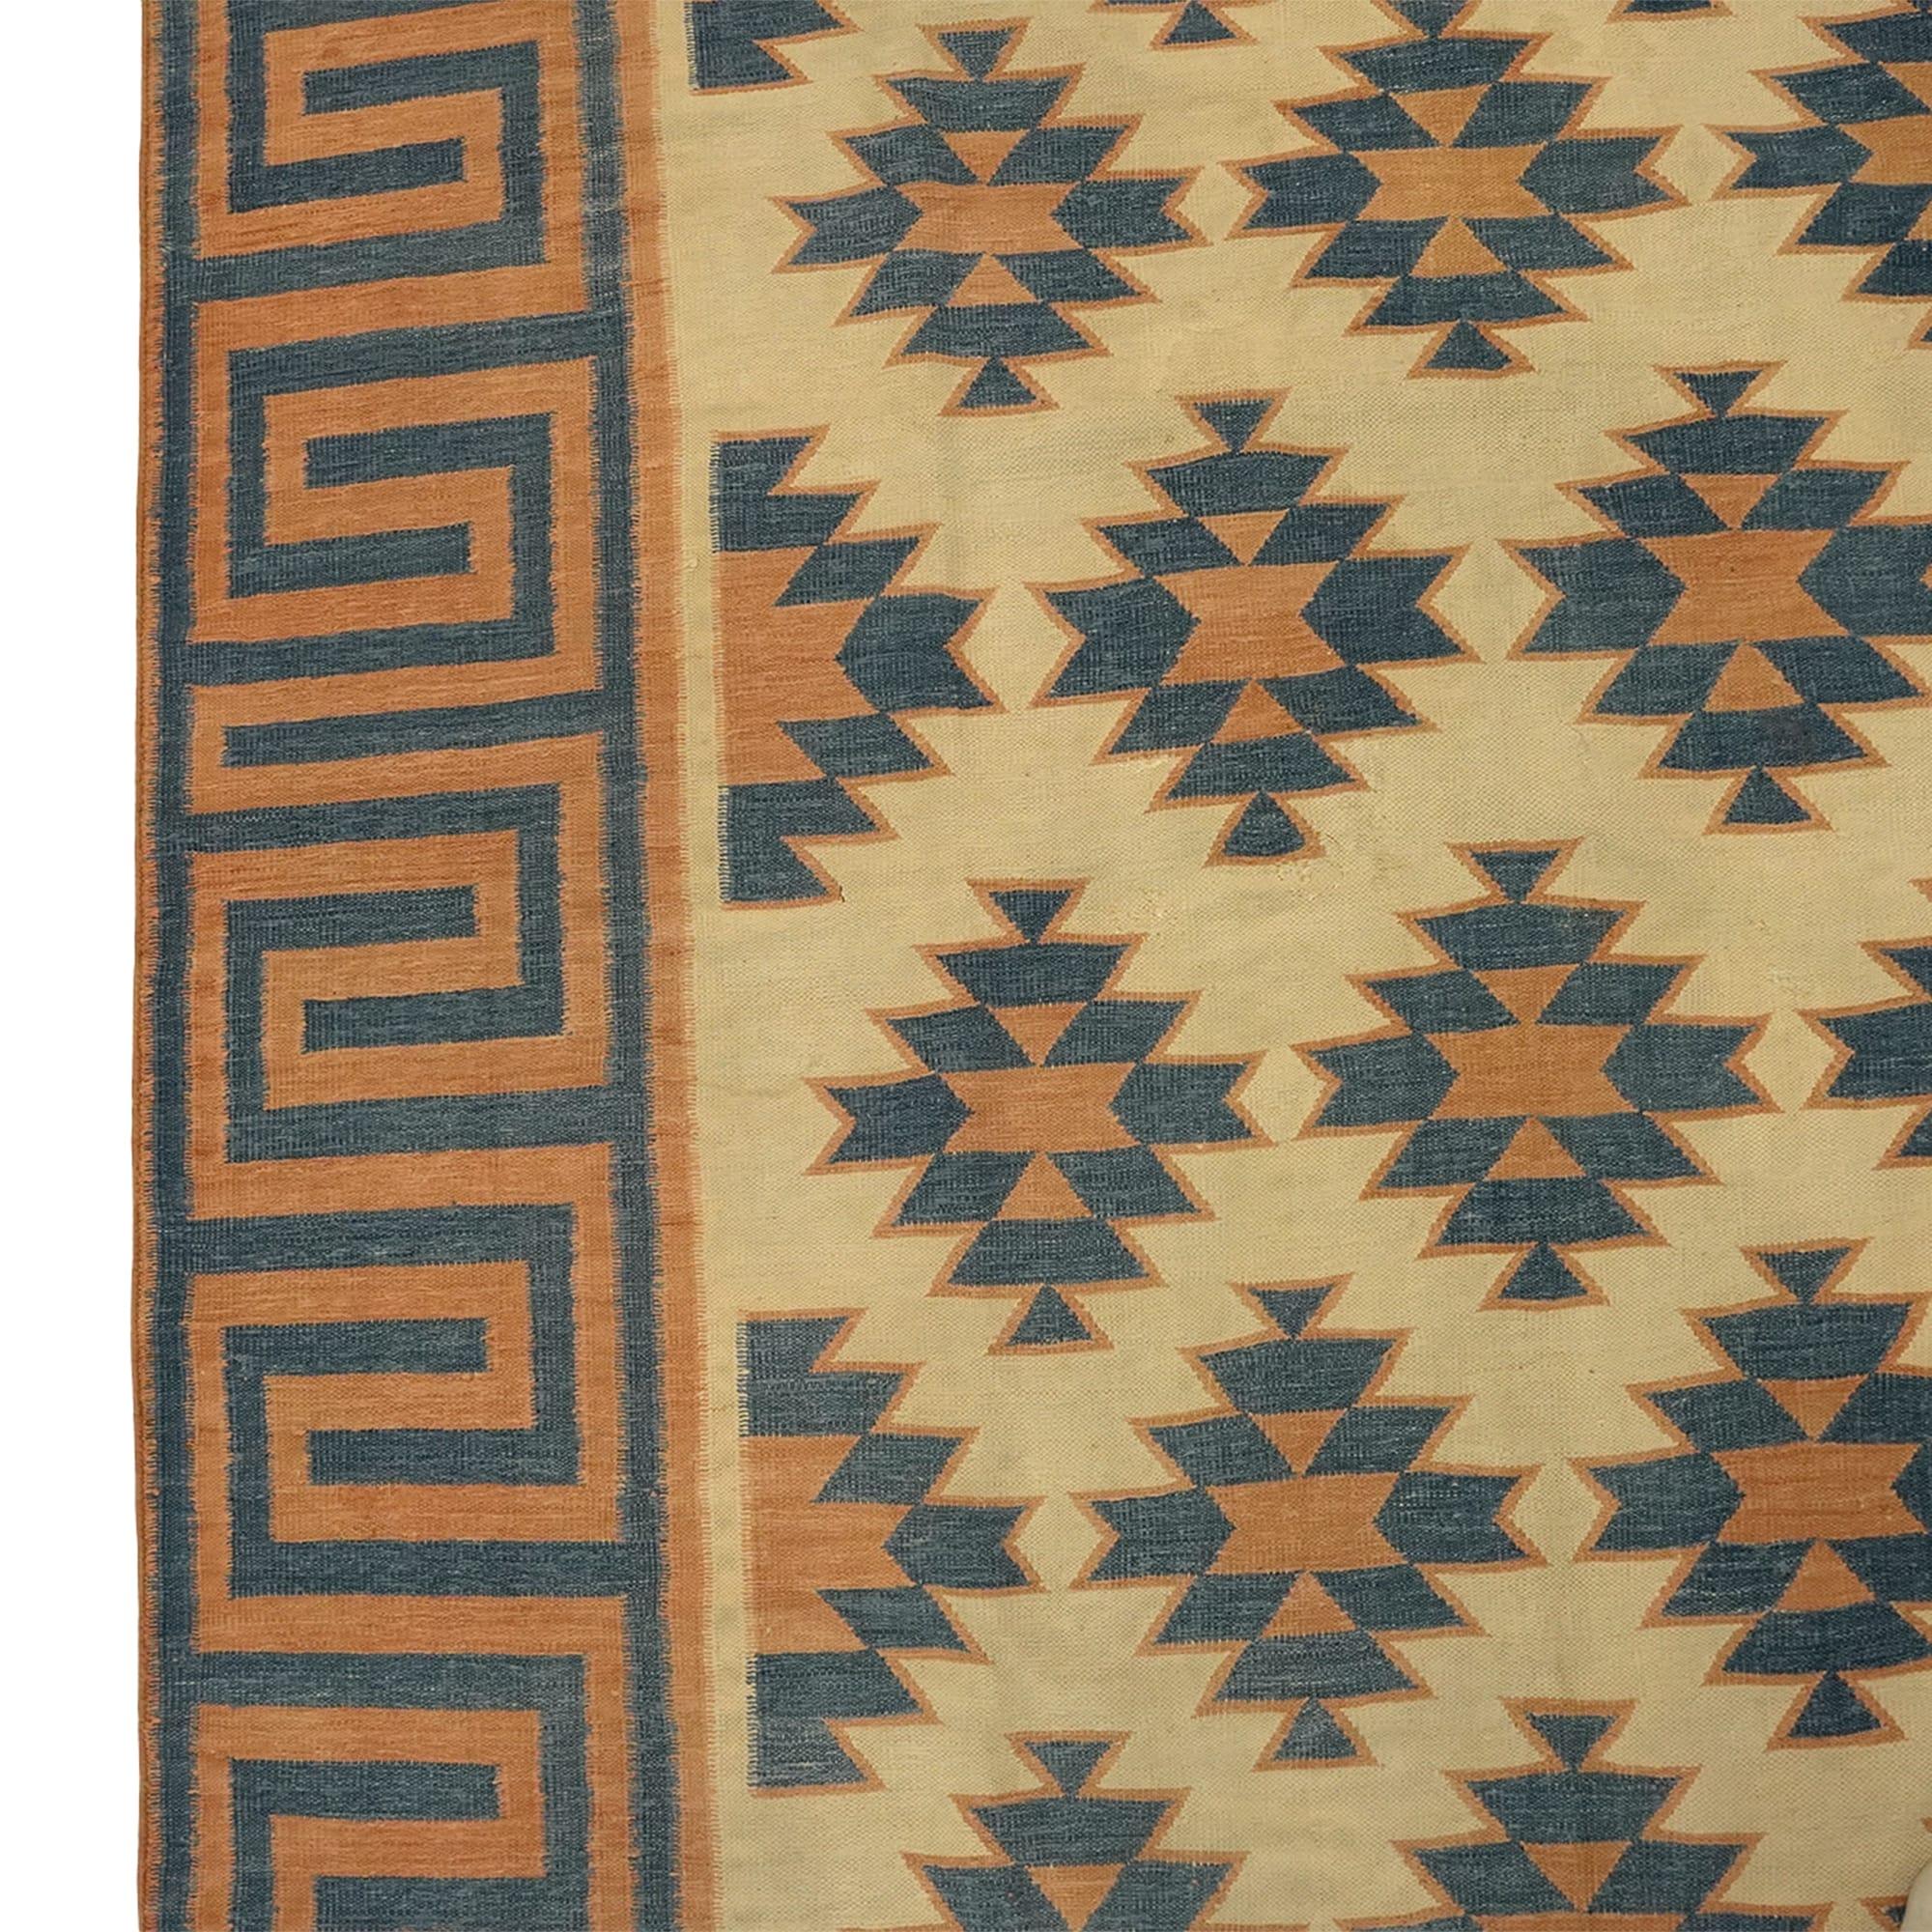 Vintage Dhurrie Geometric Square Rug from Rug & Kilim In Good Condition For Sale In Long Island City, NY